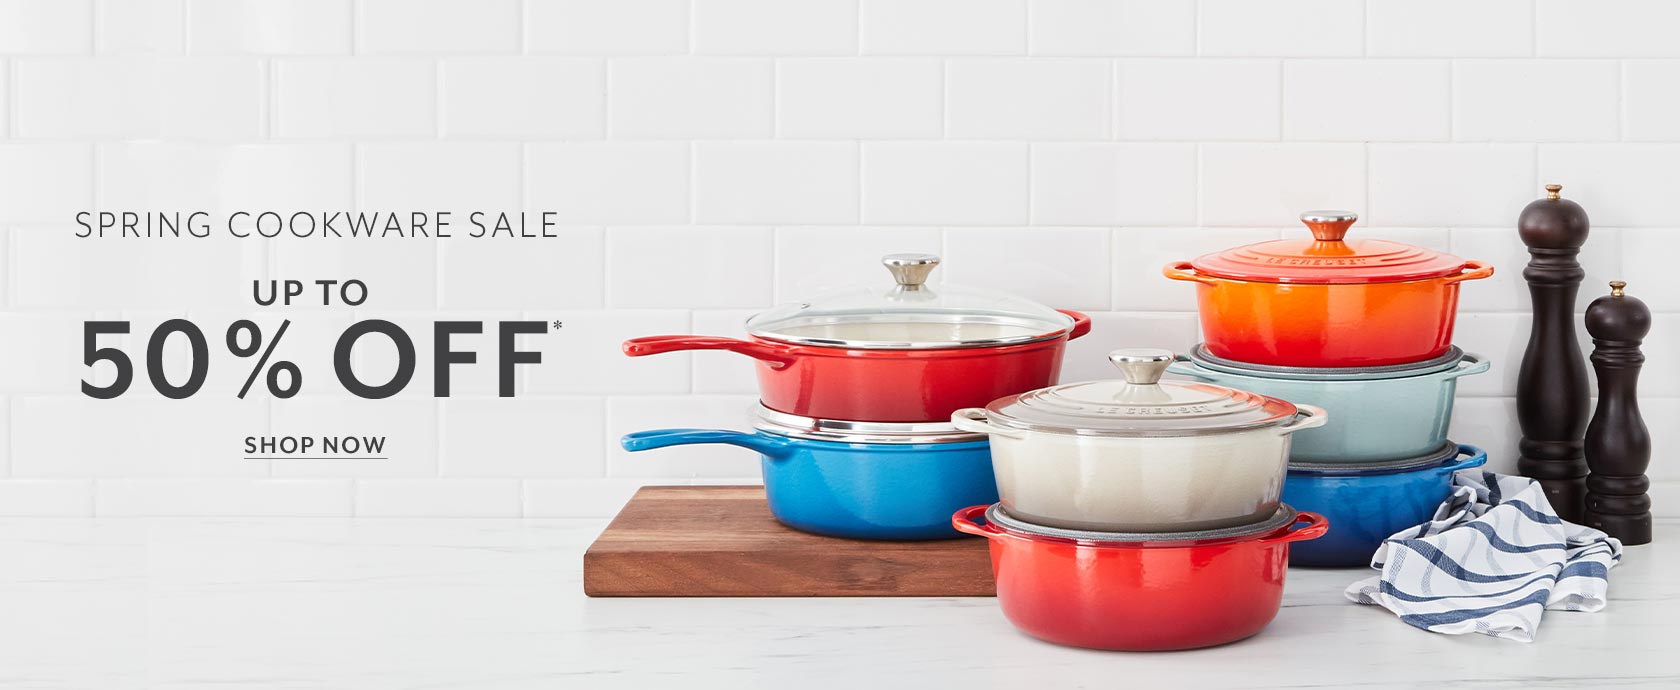 Spring Cookware Sale up to 50% off, shop now.